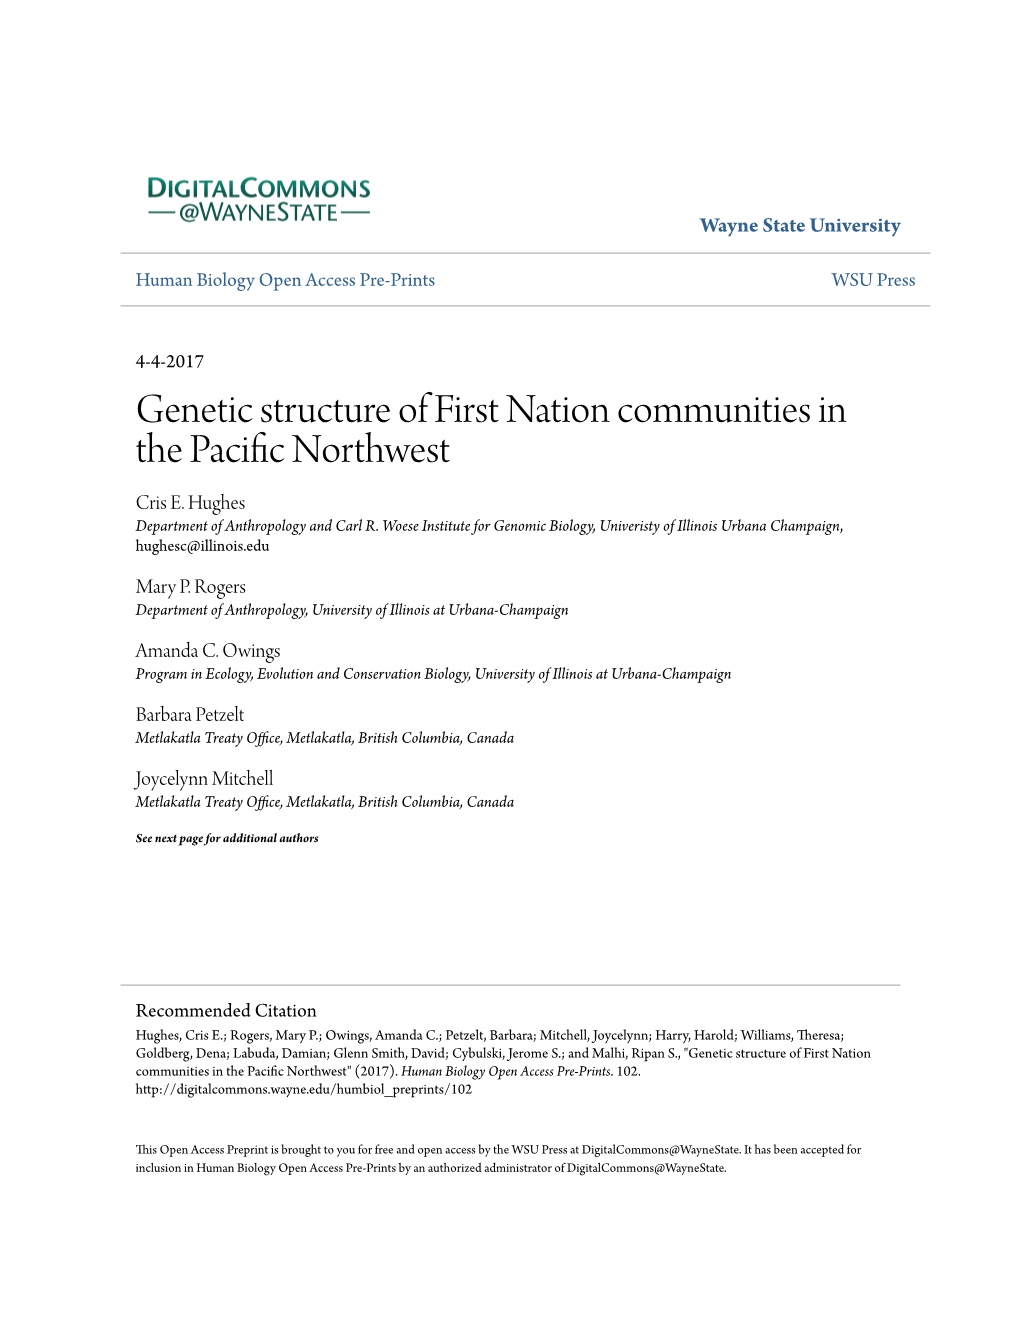 Genetic Structure of First Nation Communities in the Pacific Northwest